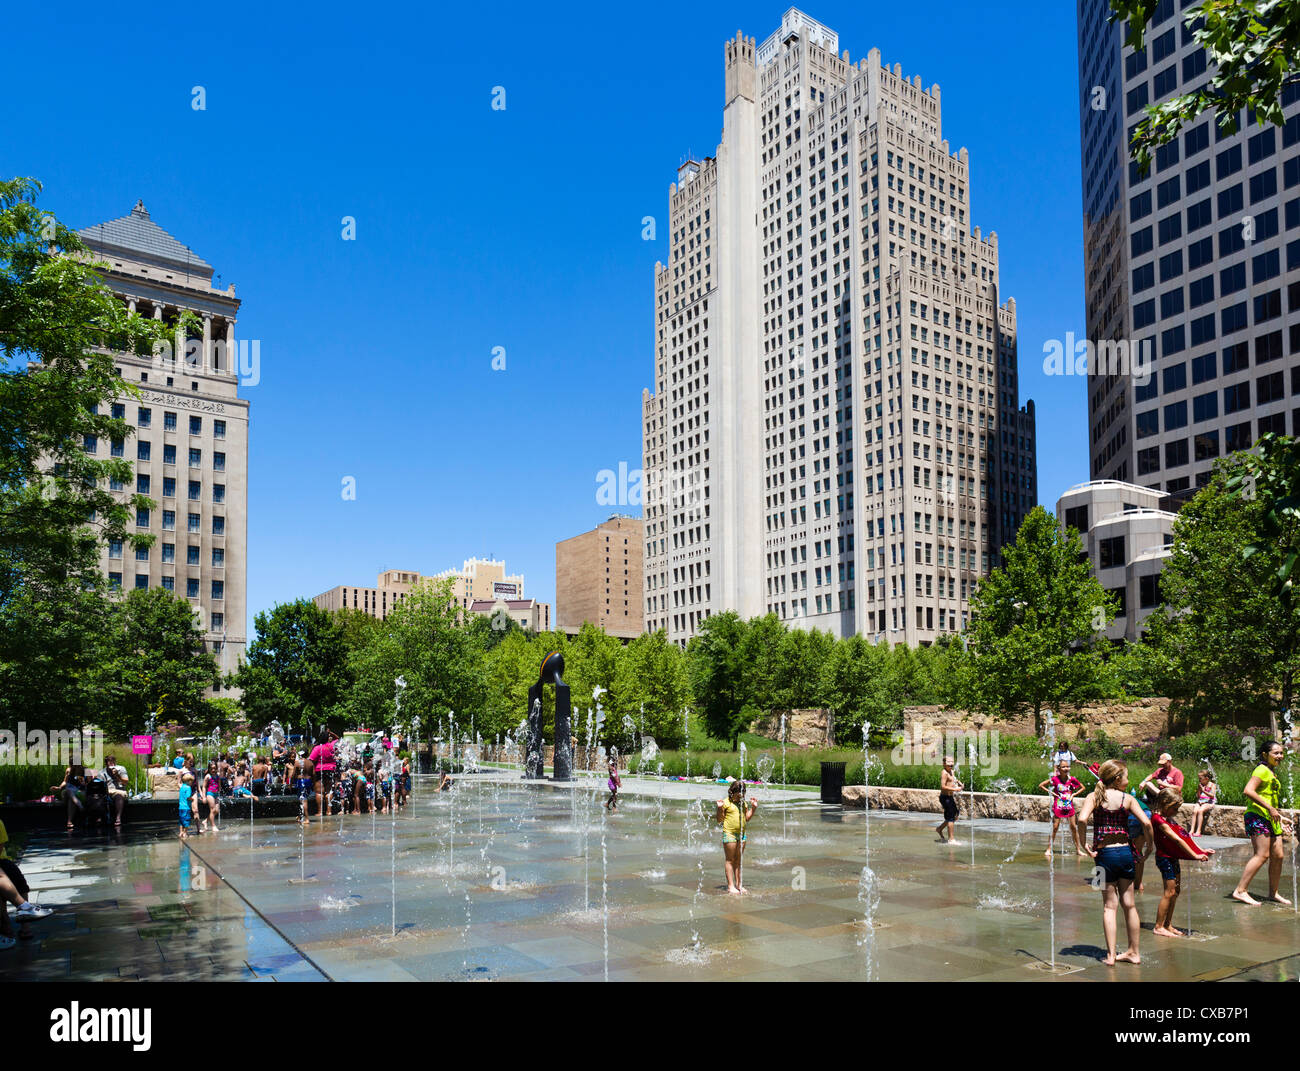 Children playing in the fountains in Citygarden urban park and sculpture garden in downtown St Louis, Missouri, USA Stock Photo